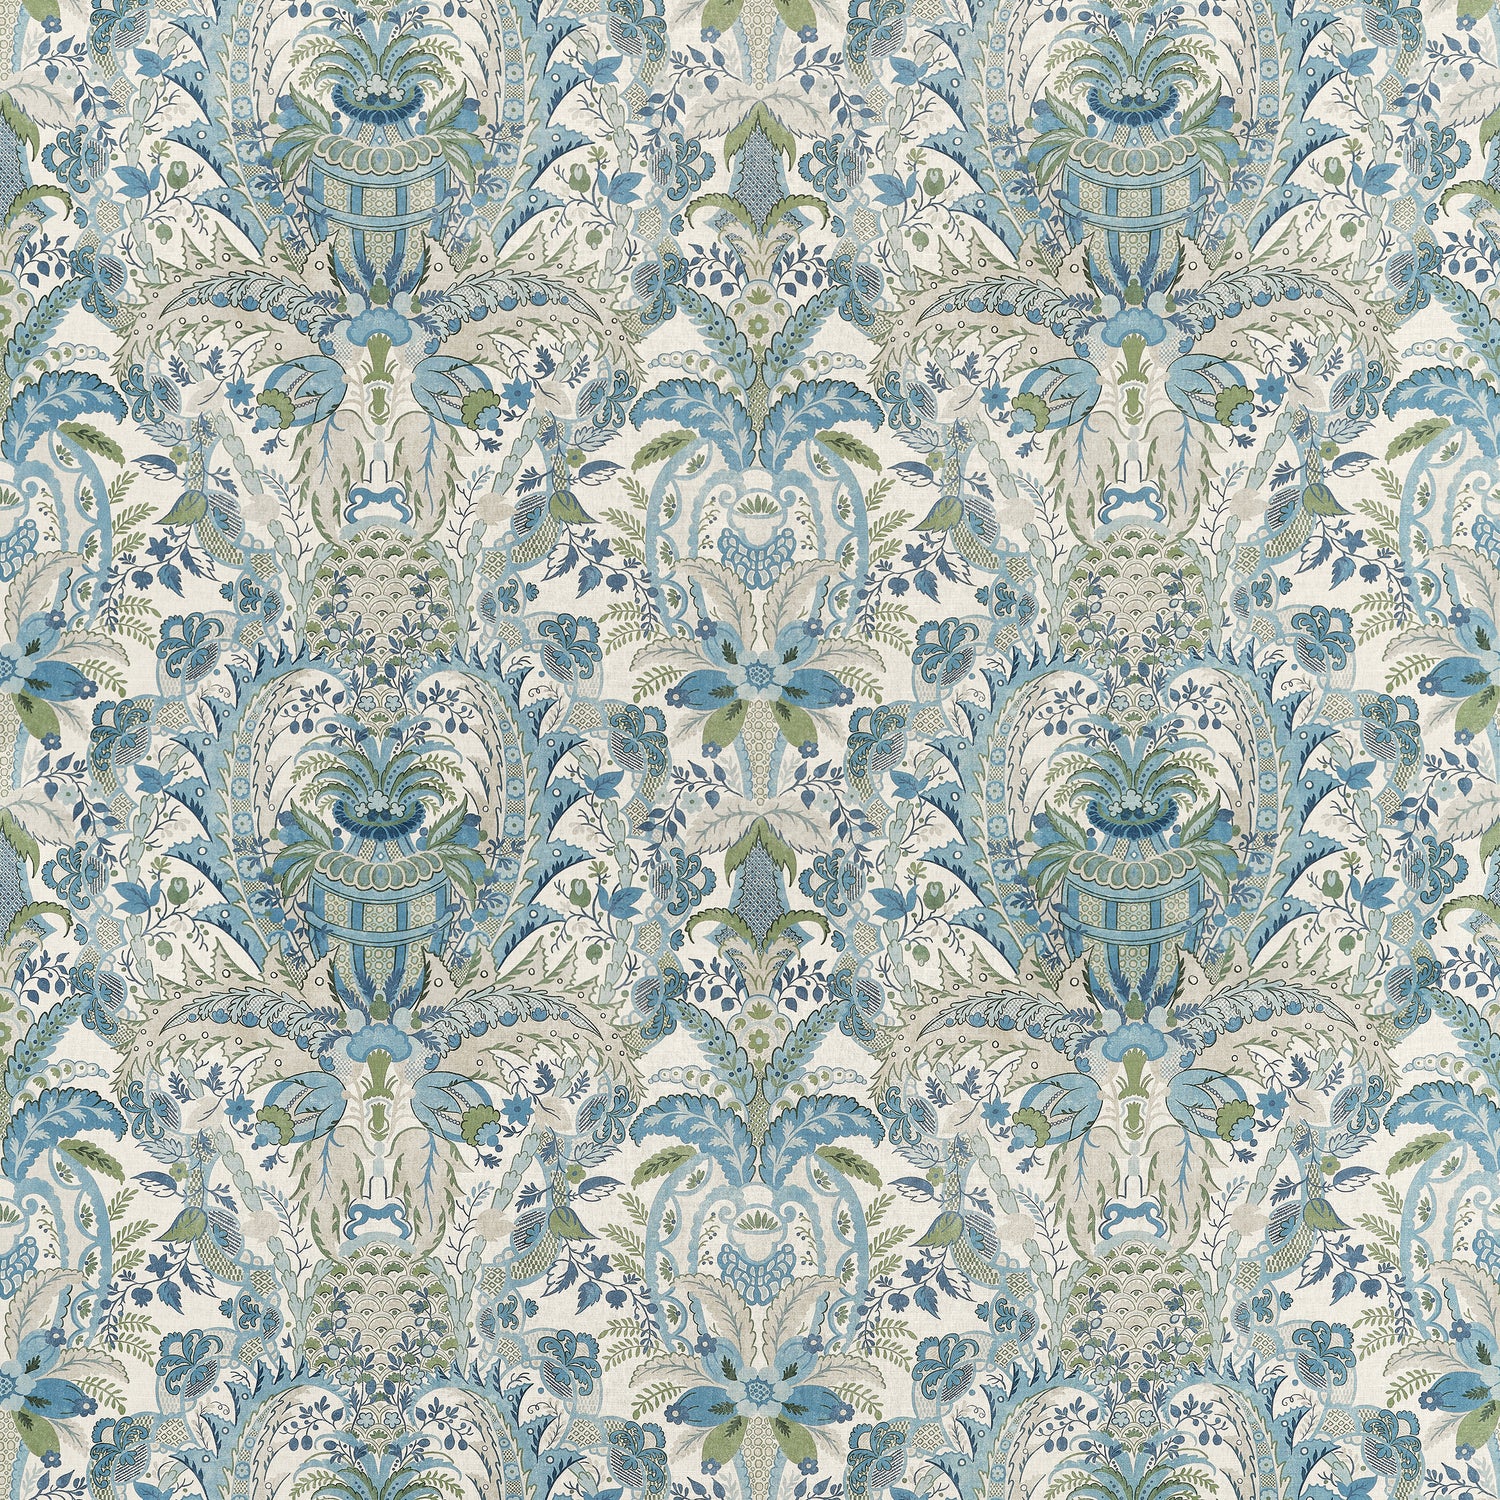 Narbeth fabric in blue and green color - pattern number AF57858 - by Anna French in the Bristol collection